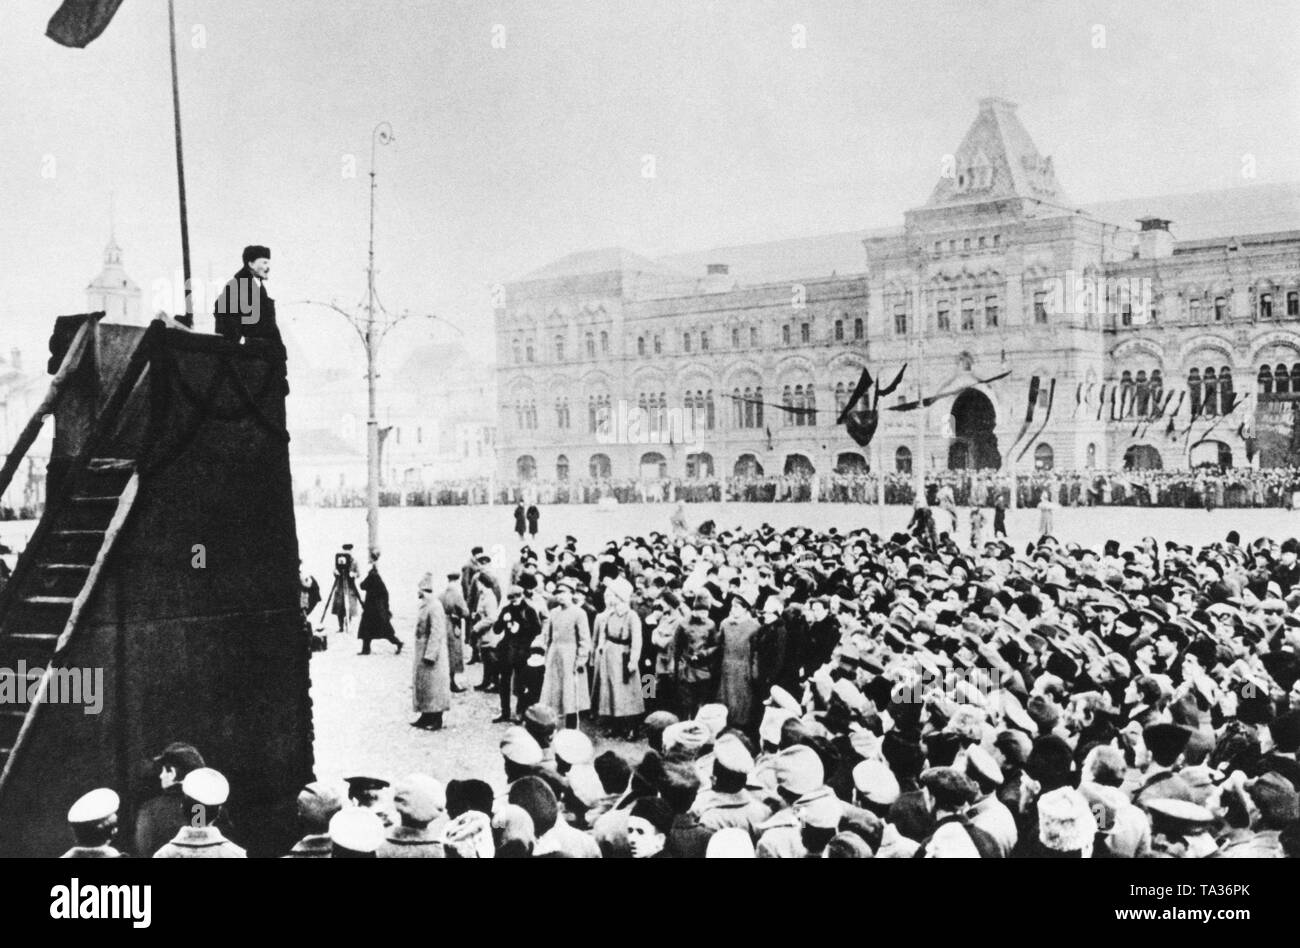 On the first anniversary of the October Revolution, Vladimir Ilyich Lenin is giving a speech to soldiers and party members at the Red Square in Moscow. Stock Photo